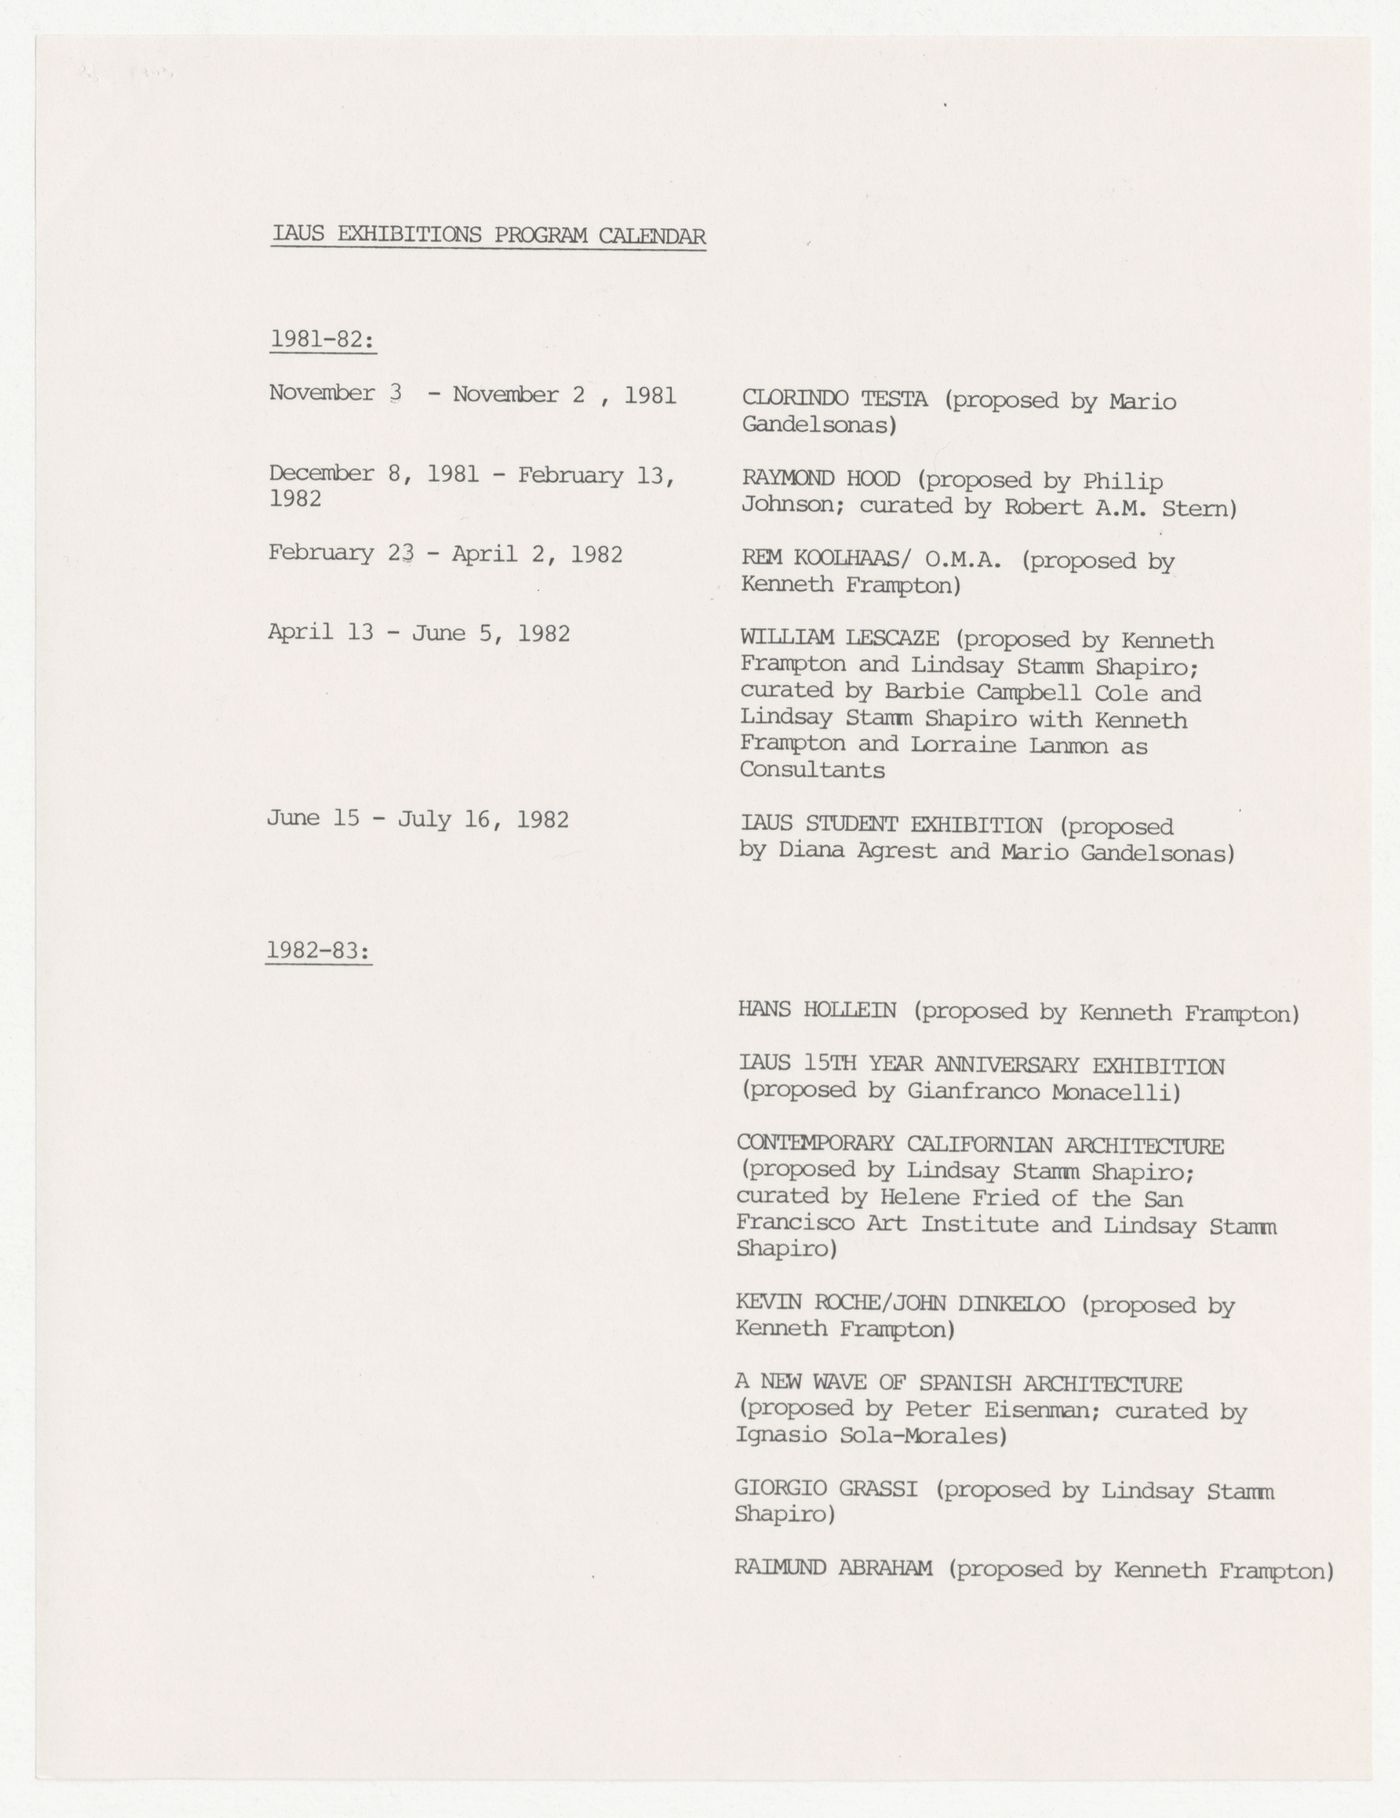 Exhibition program calendar, status report, and budgets for financial year 1981-1982 with annotations by Peter D. Eisenman